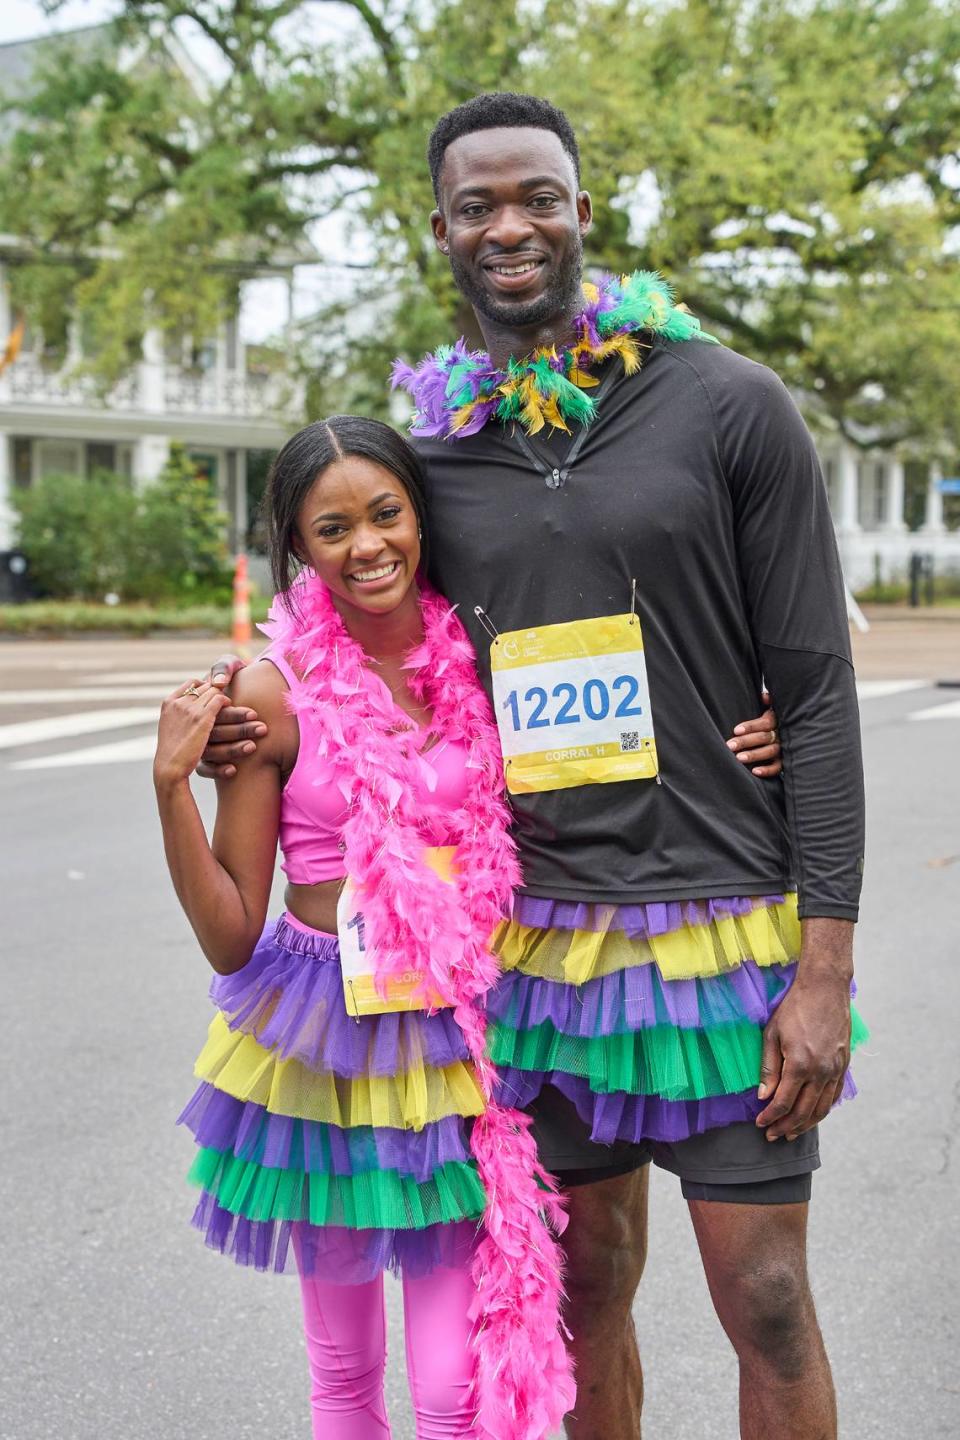 Charity and Dotun run a race together in New Orleans.